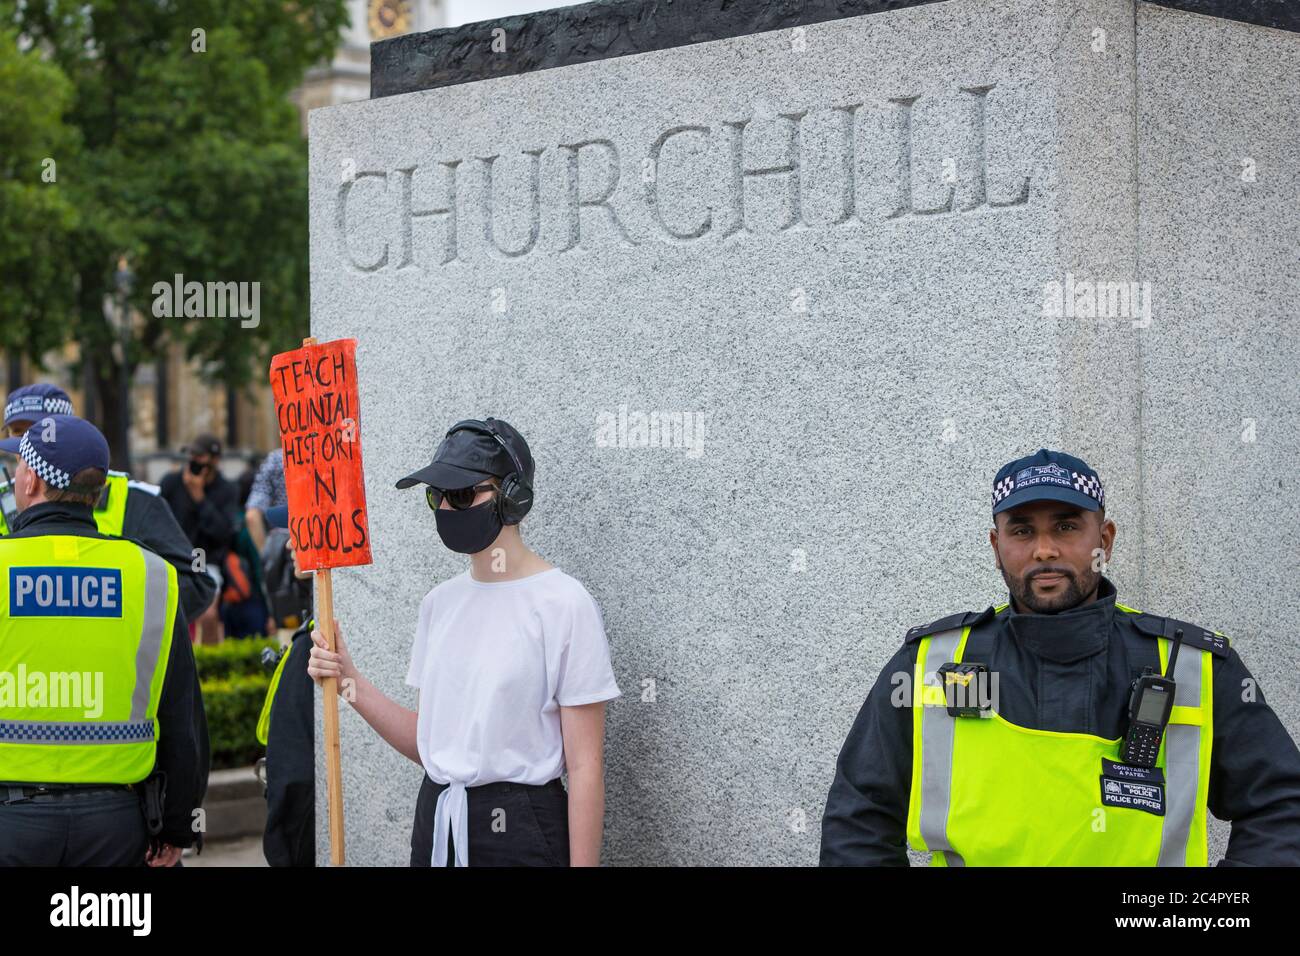 Protester asking for colonialism to be taught in schools under the Churchill statue at a Black Lives Matter protest in London Stock Photo